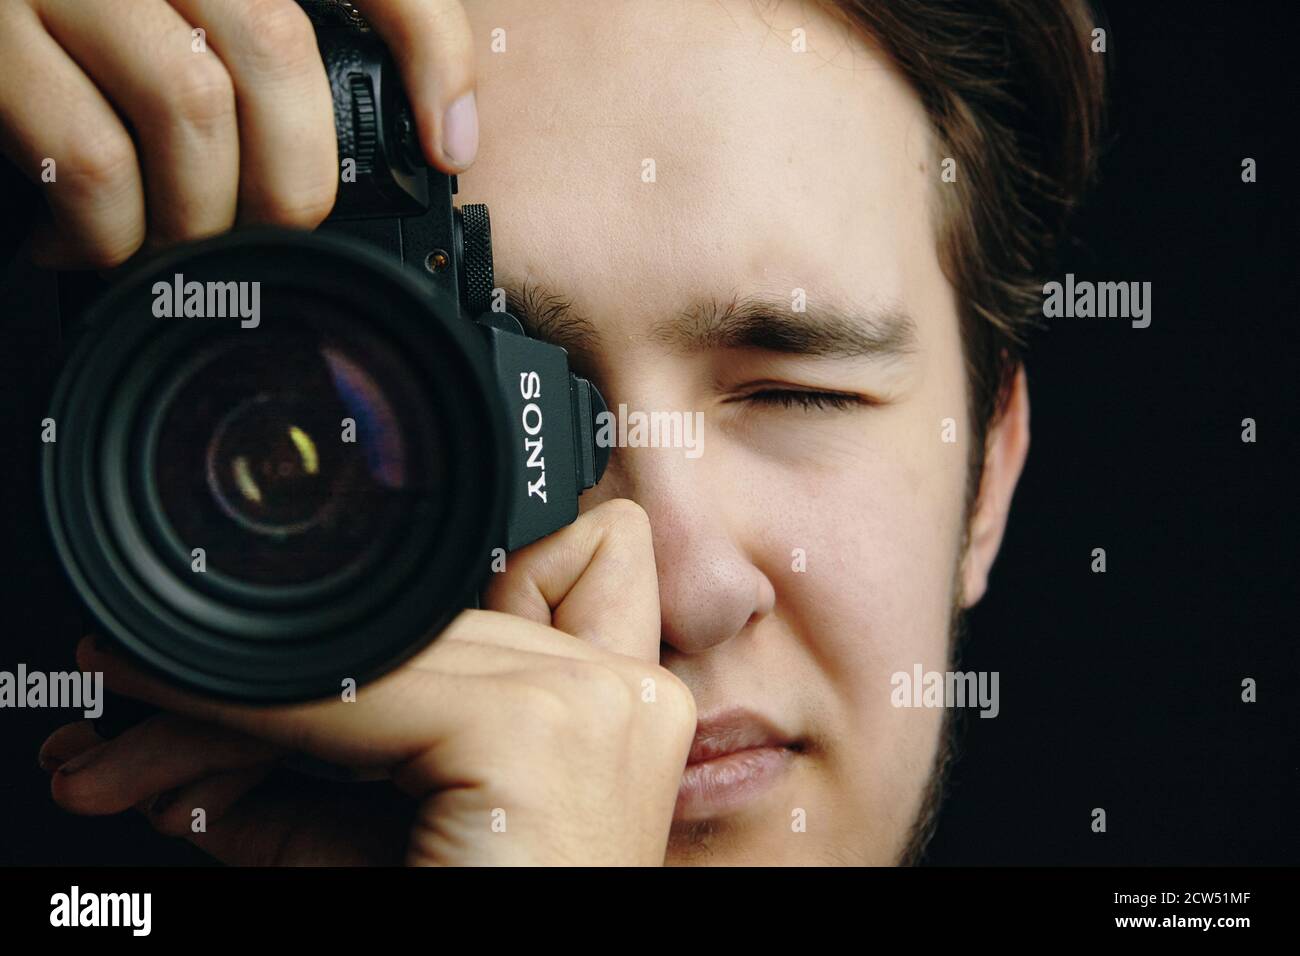 Man takes pictures on Sony alpha 7 camera. Person tries to focus the lens. Photo editor, cameraman, journalist. Bishkek, Kyrgyzstan - December 15, 2019. Stock Photo